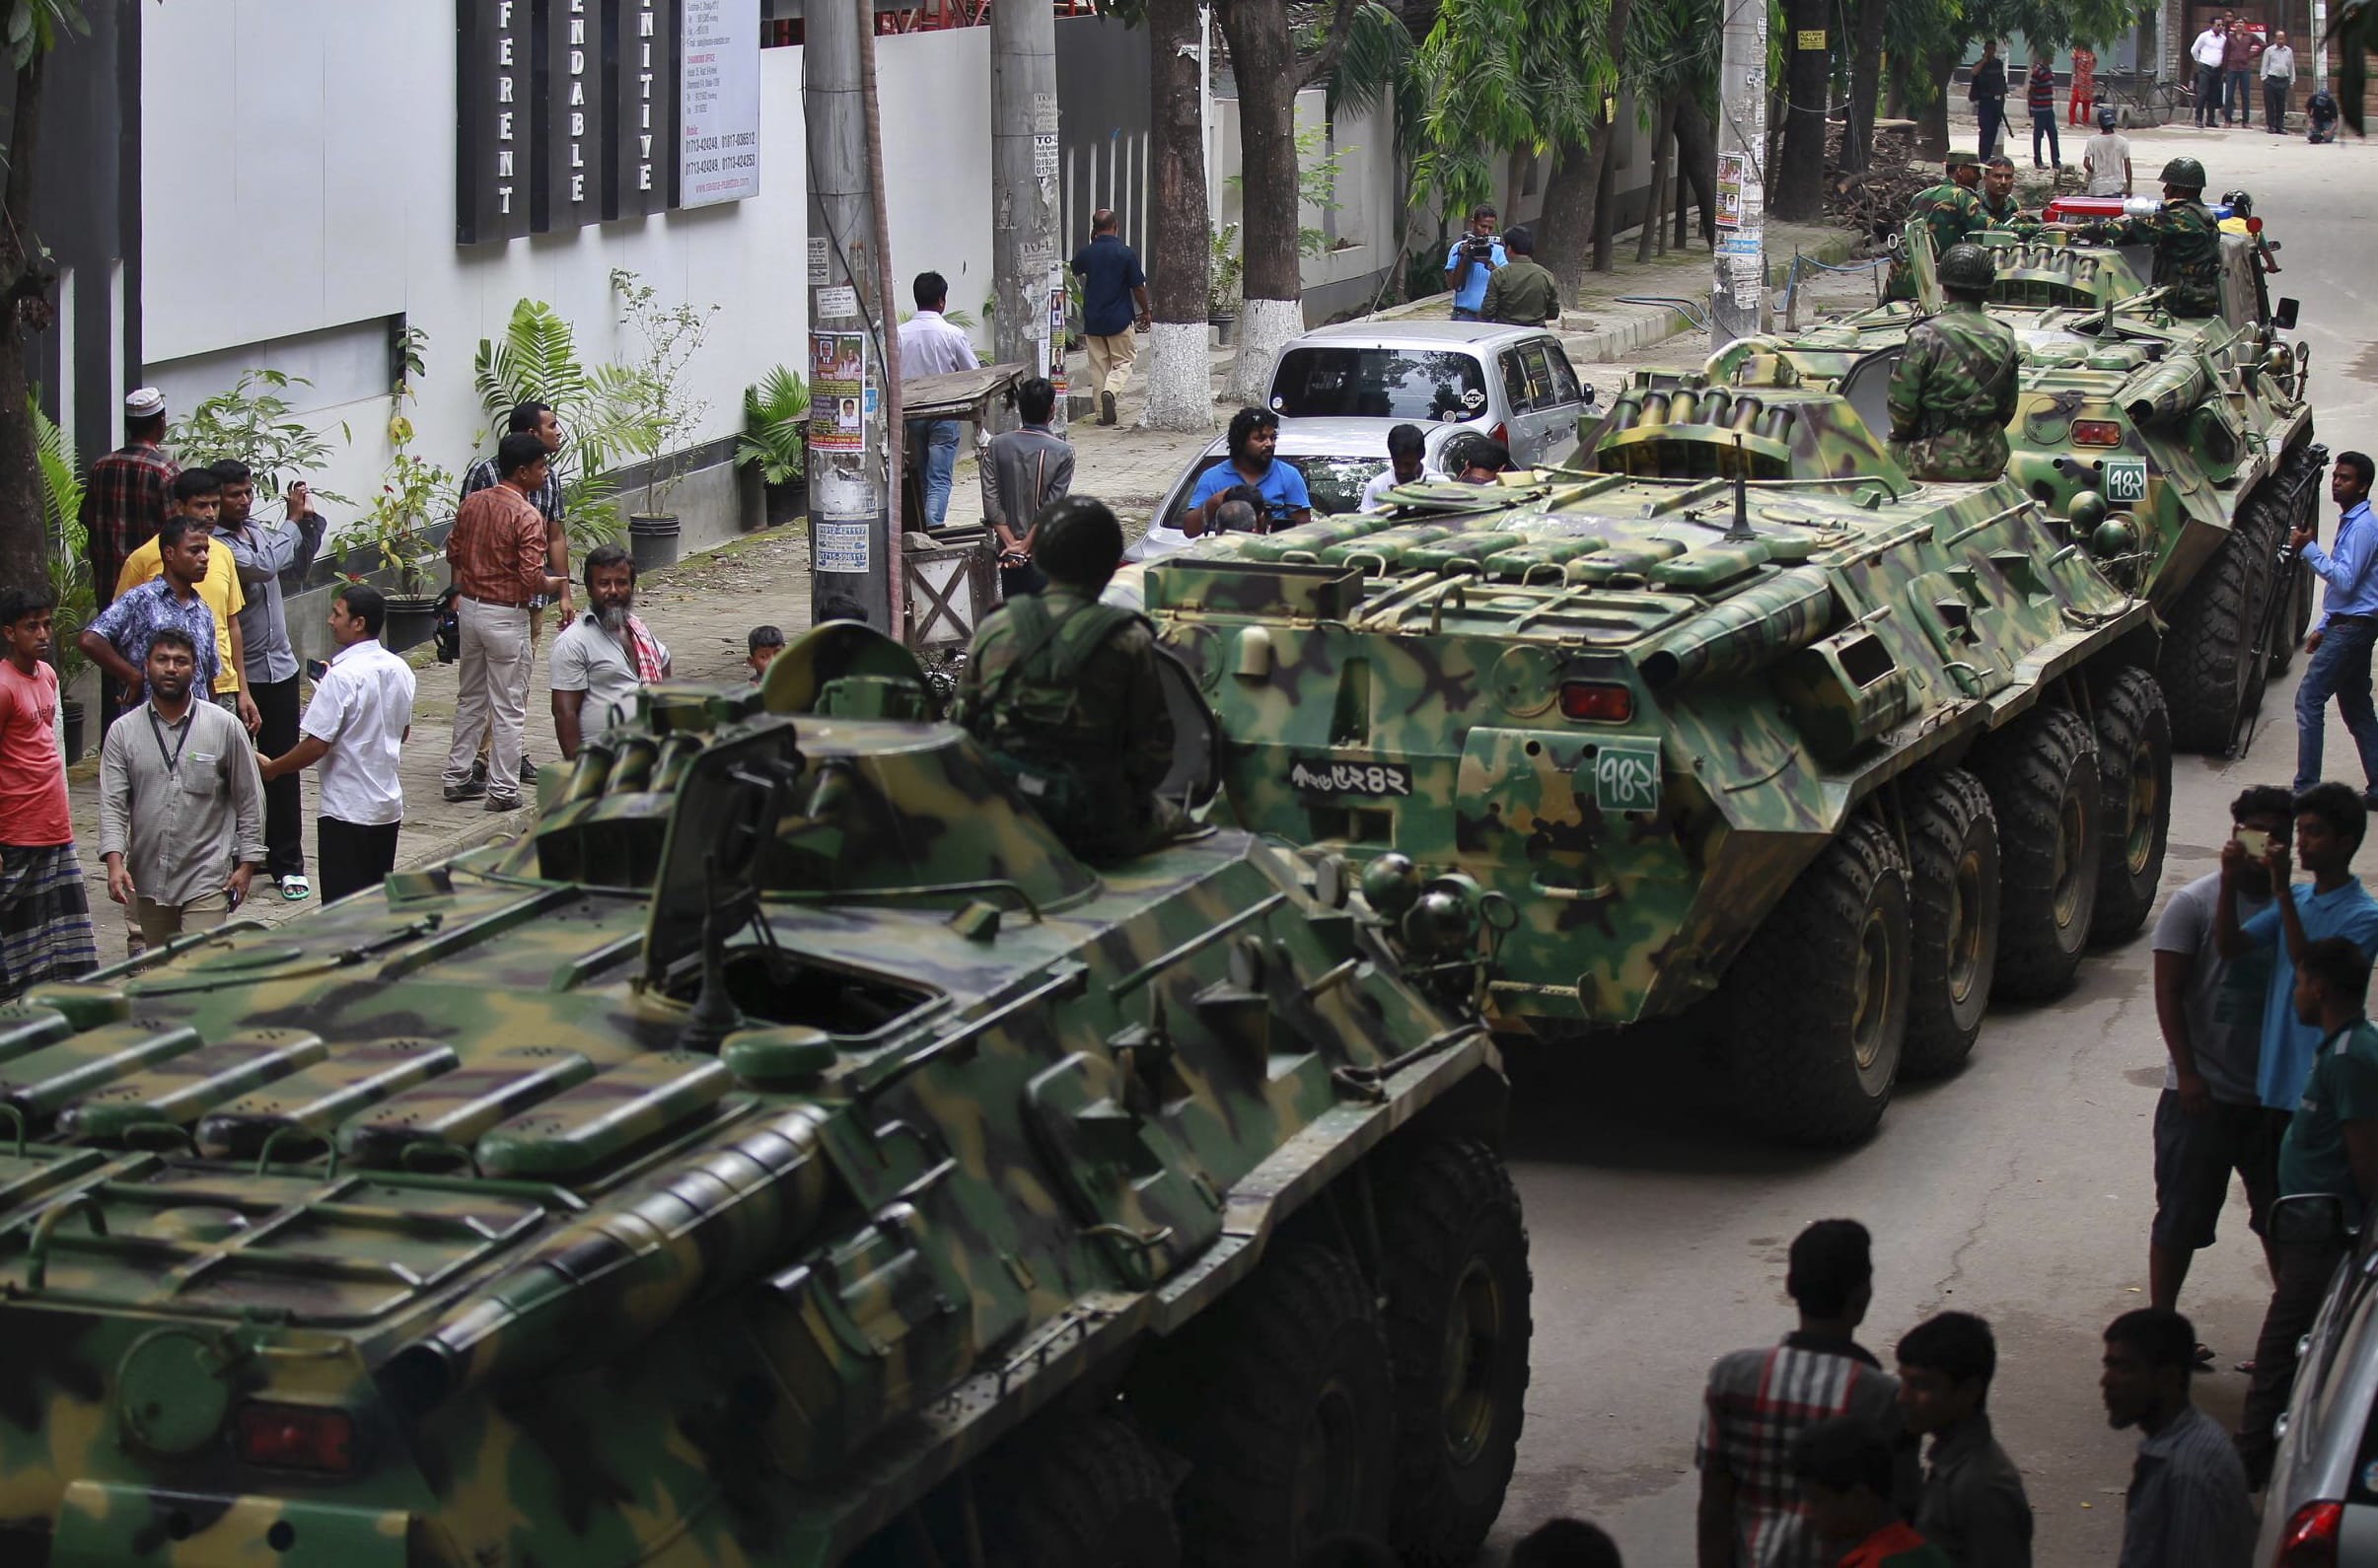 Armored vehicles pass by after an operation against militants who took hostages at a restaurant popular with foreigners in Dhaka, Bangladesh, Saturday, July 2, 2016. Bangladeshi forces stormed the Holey Artisan Bakery in Dhaka's Gulshan area where heavily armed militants held dozens of people hostage Saturday morning, rescuing some captives including foreigners at the end of an hours long standoff.